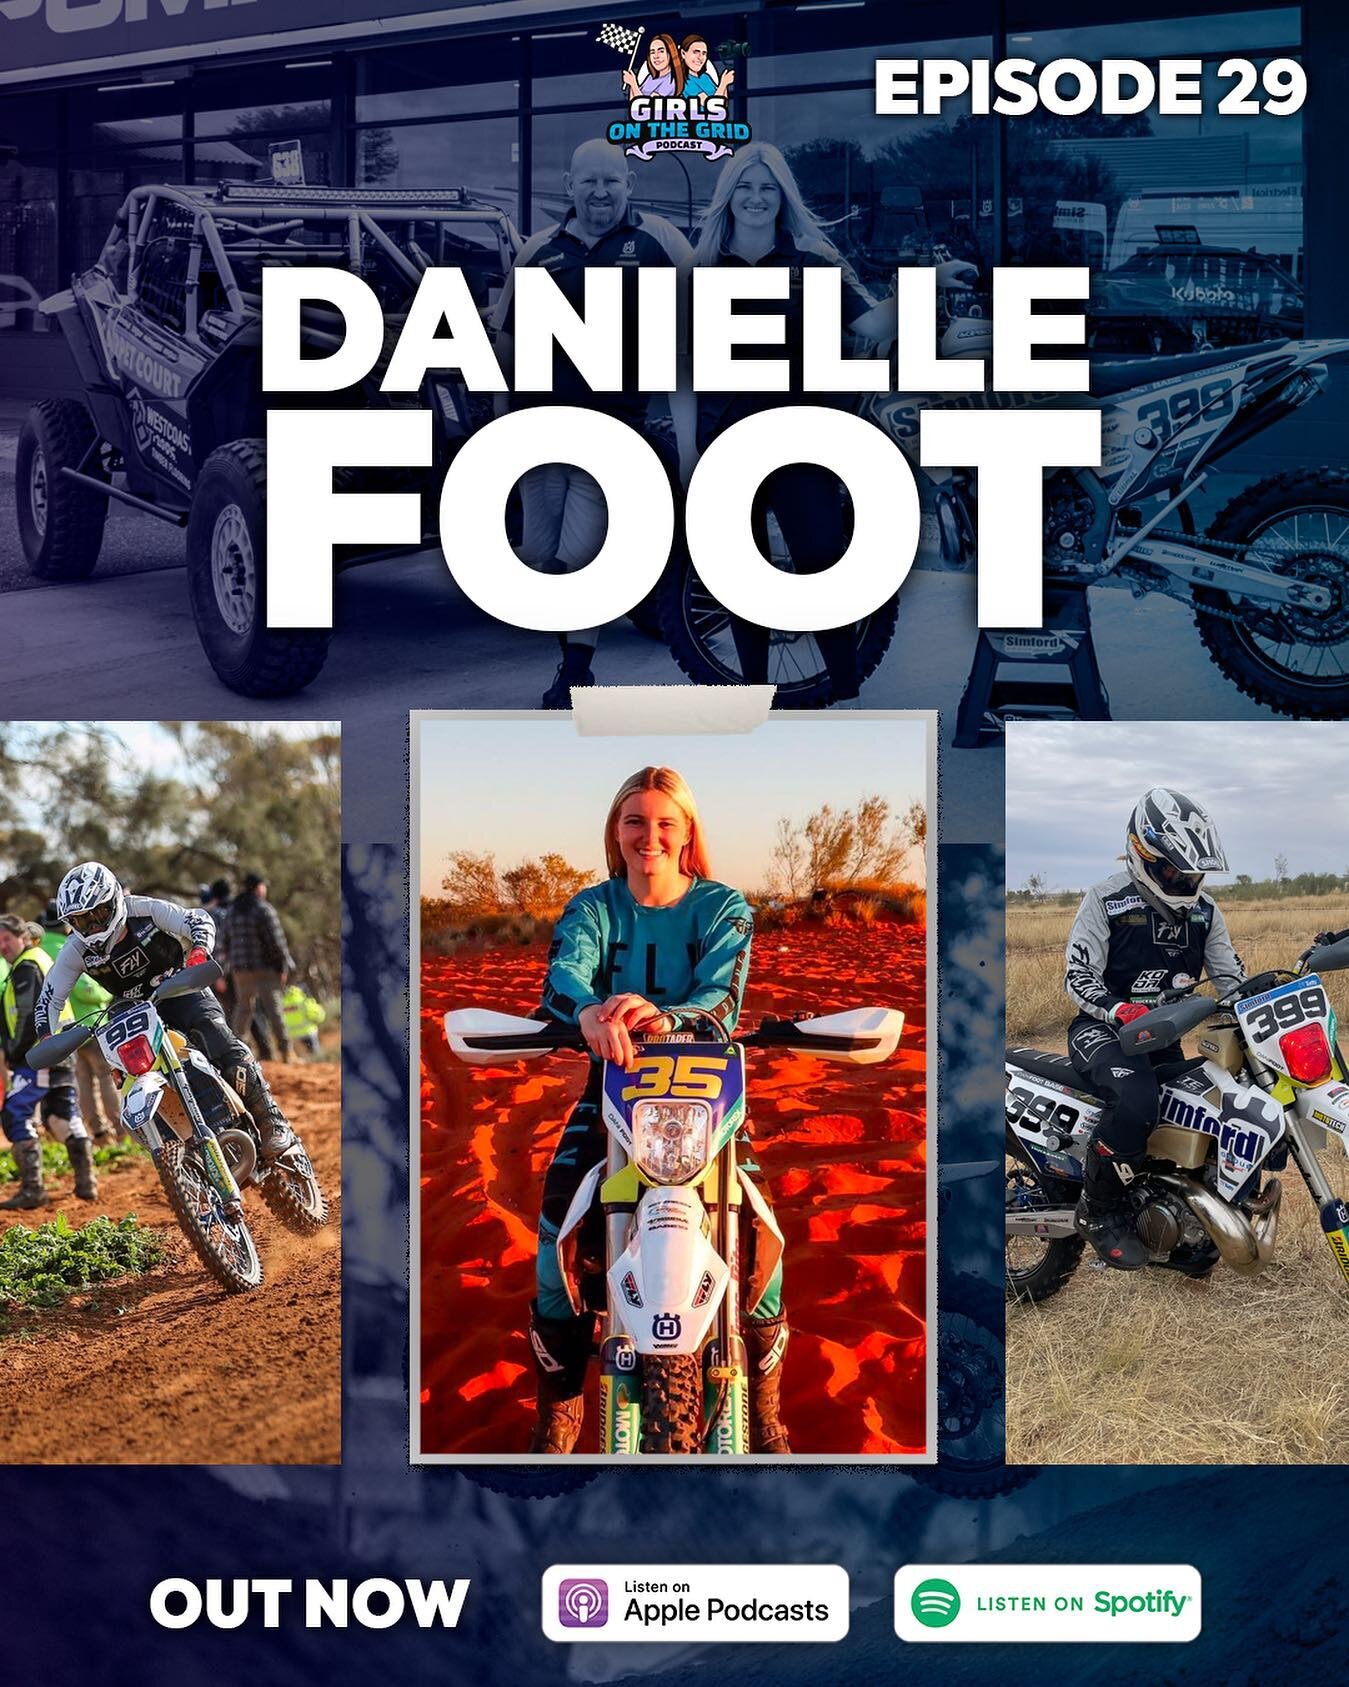 @danifoot35 joins Girls On The Grid this week to talk about how she got started racing motocross, her motocross career and her switch the desert racing, including tackling Australia's Greatest Off-Road Race, the Finke Desert Race.

You can listen to 